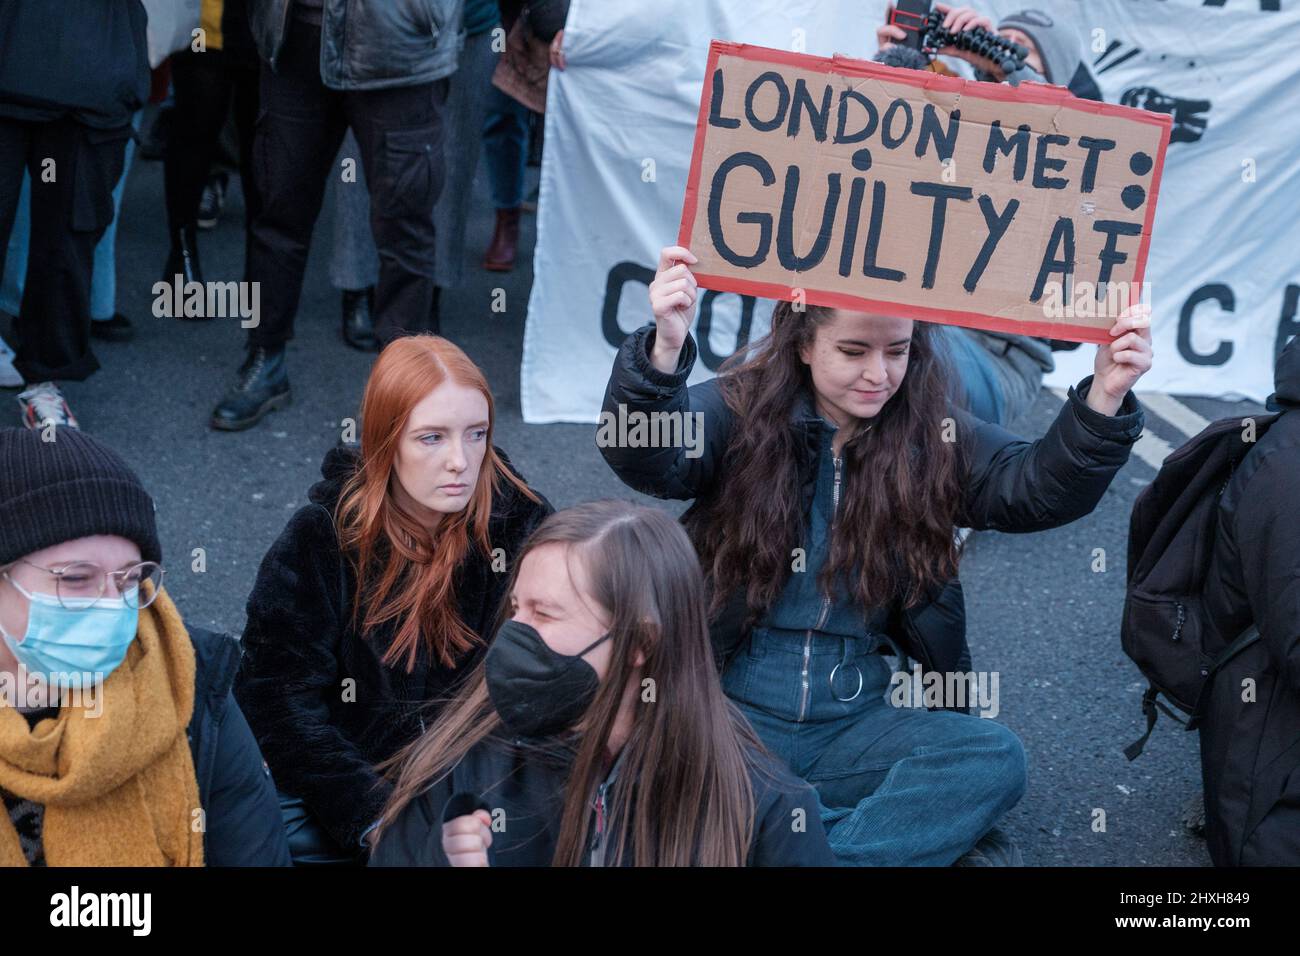 Sister Uncut came out in large with Marvina Newton & Patsy Stevenson to protest against the abusive Powers of the Police against women and the Clapham Stock Photo